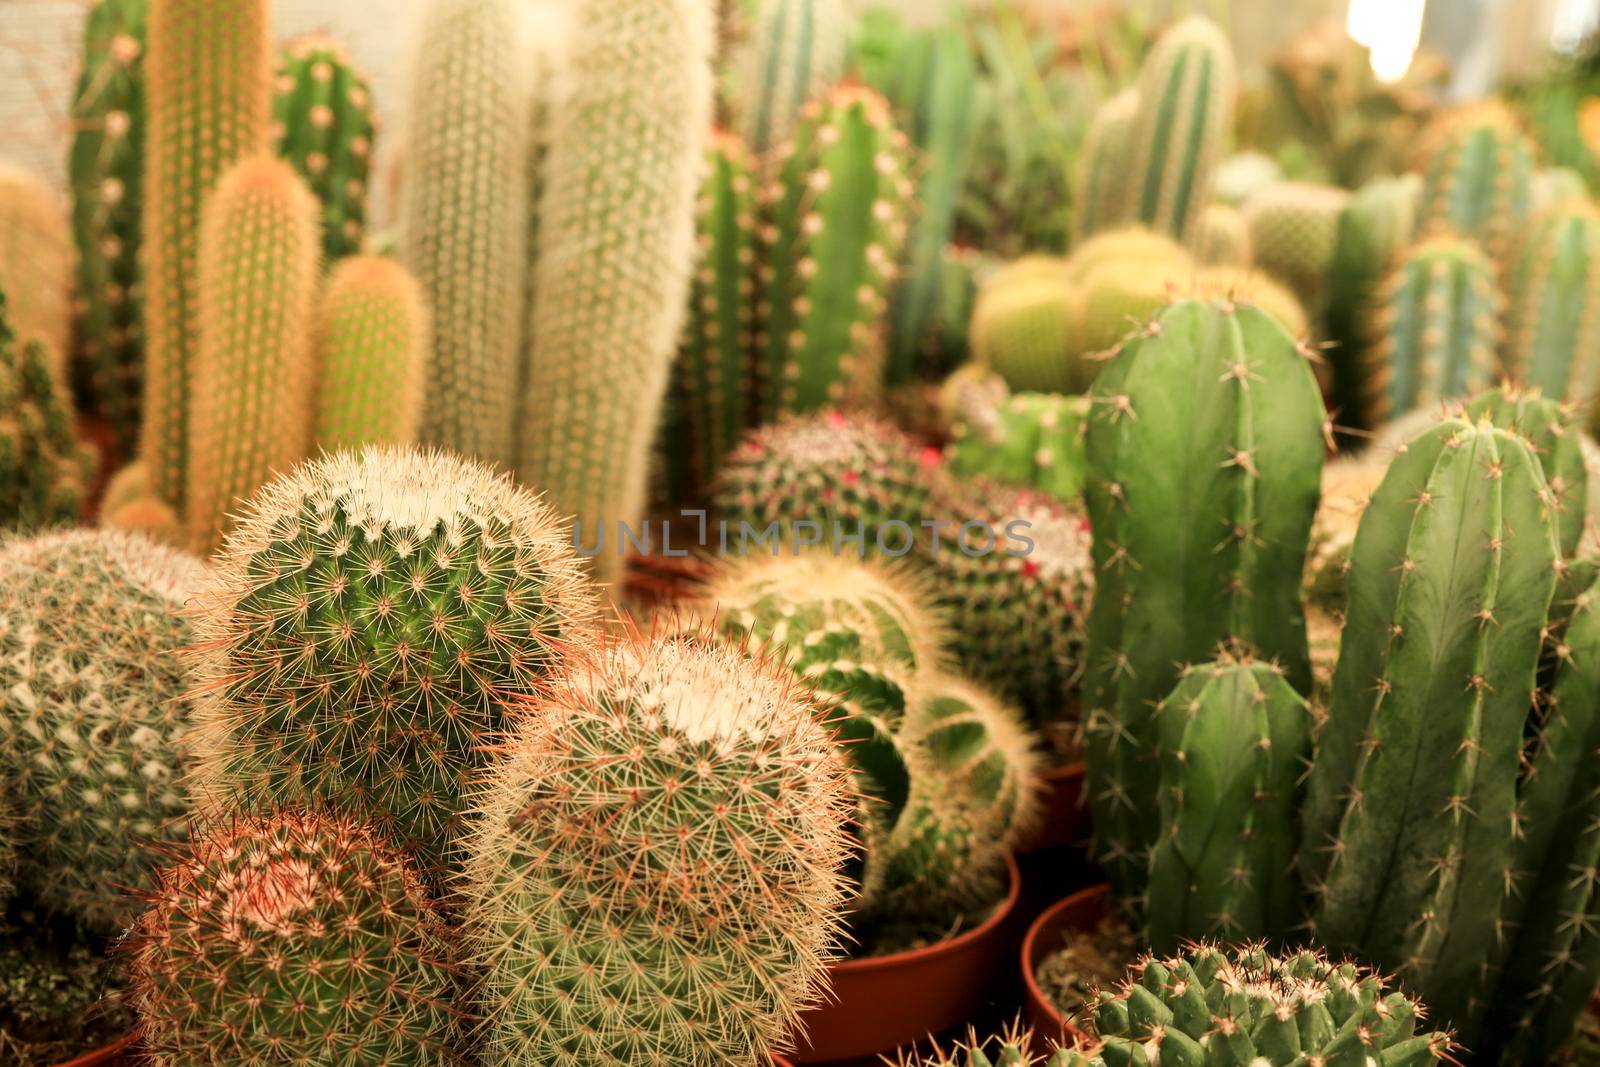 Pots of different kind of cactus for sale in Spain